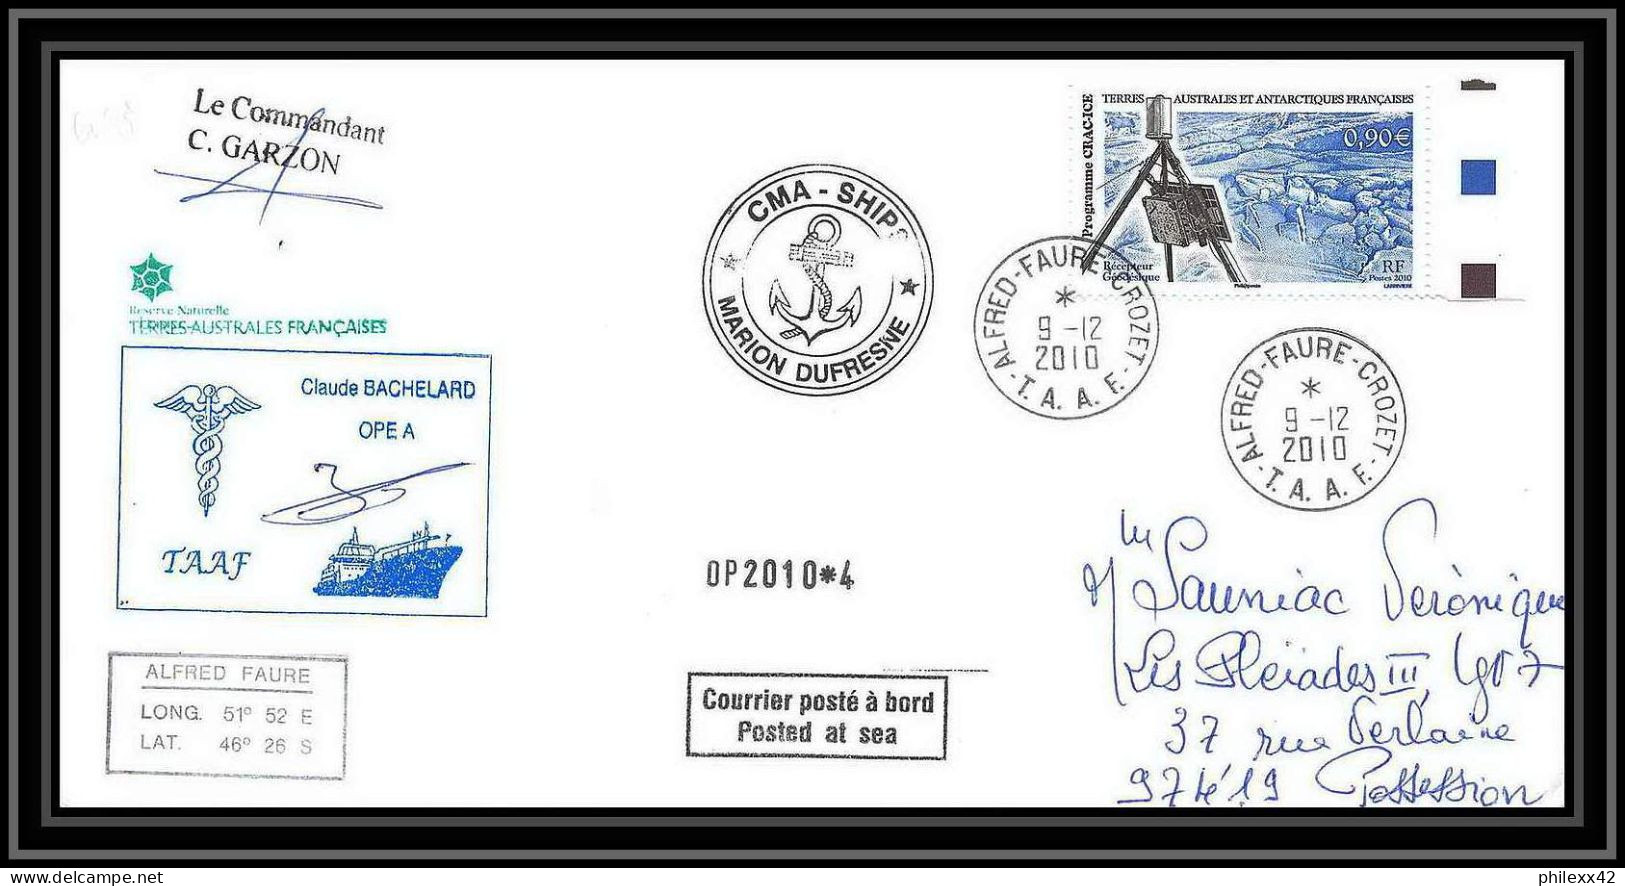 3054 Helilagon Dufresne Signé Signed Op 2010/4 Crozet 9/12/2010 N°559 ANTARCTIC Terres Australes (taaf) Lettre Cover - Hélicoptères